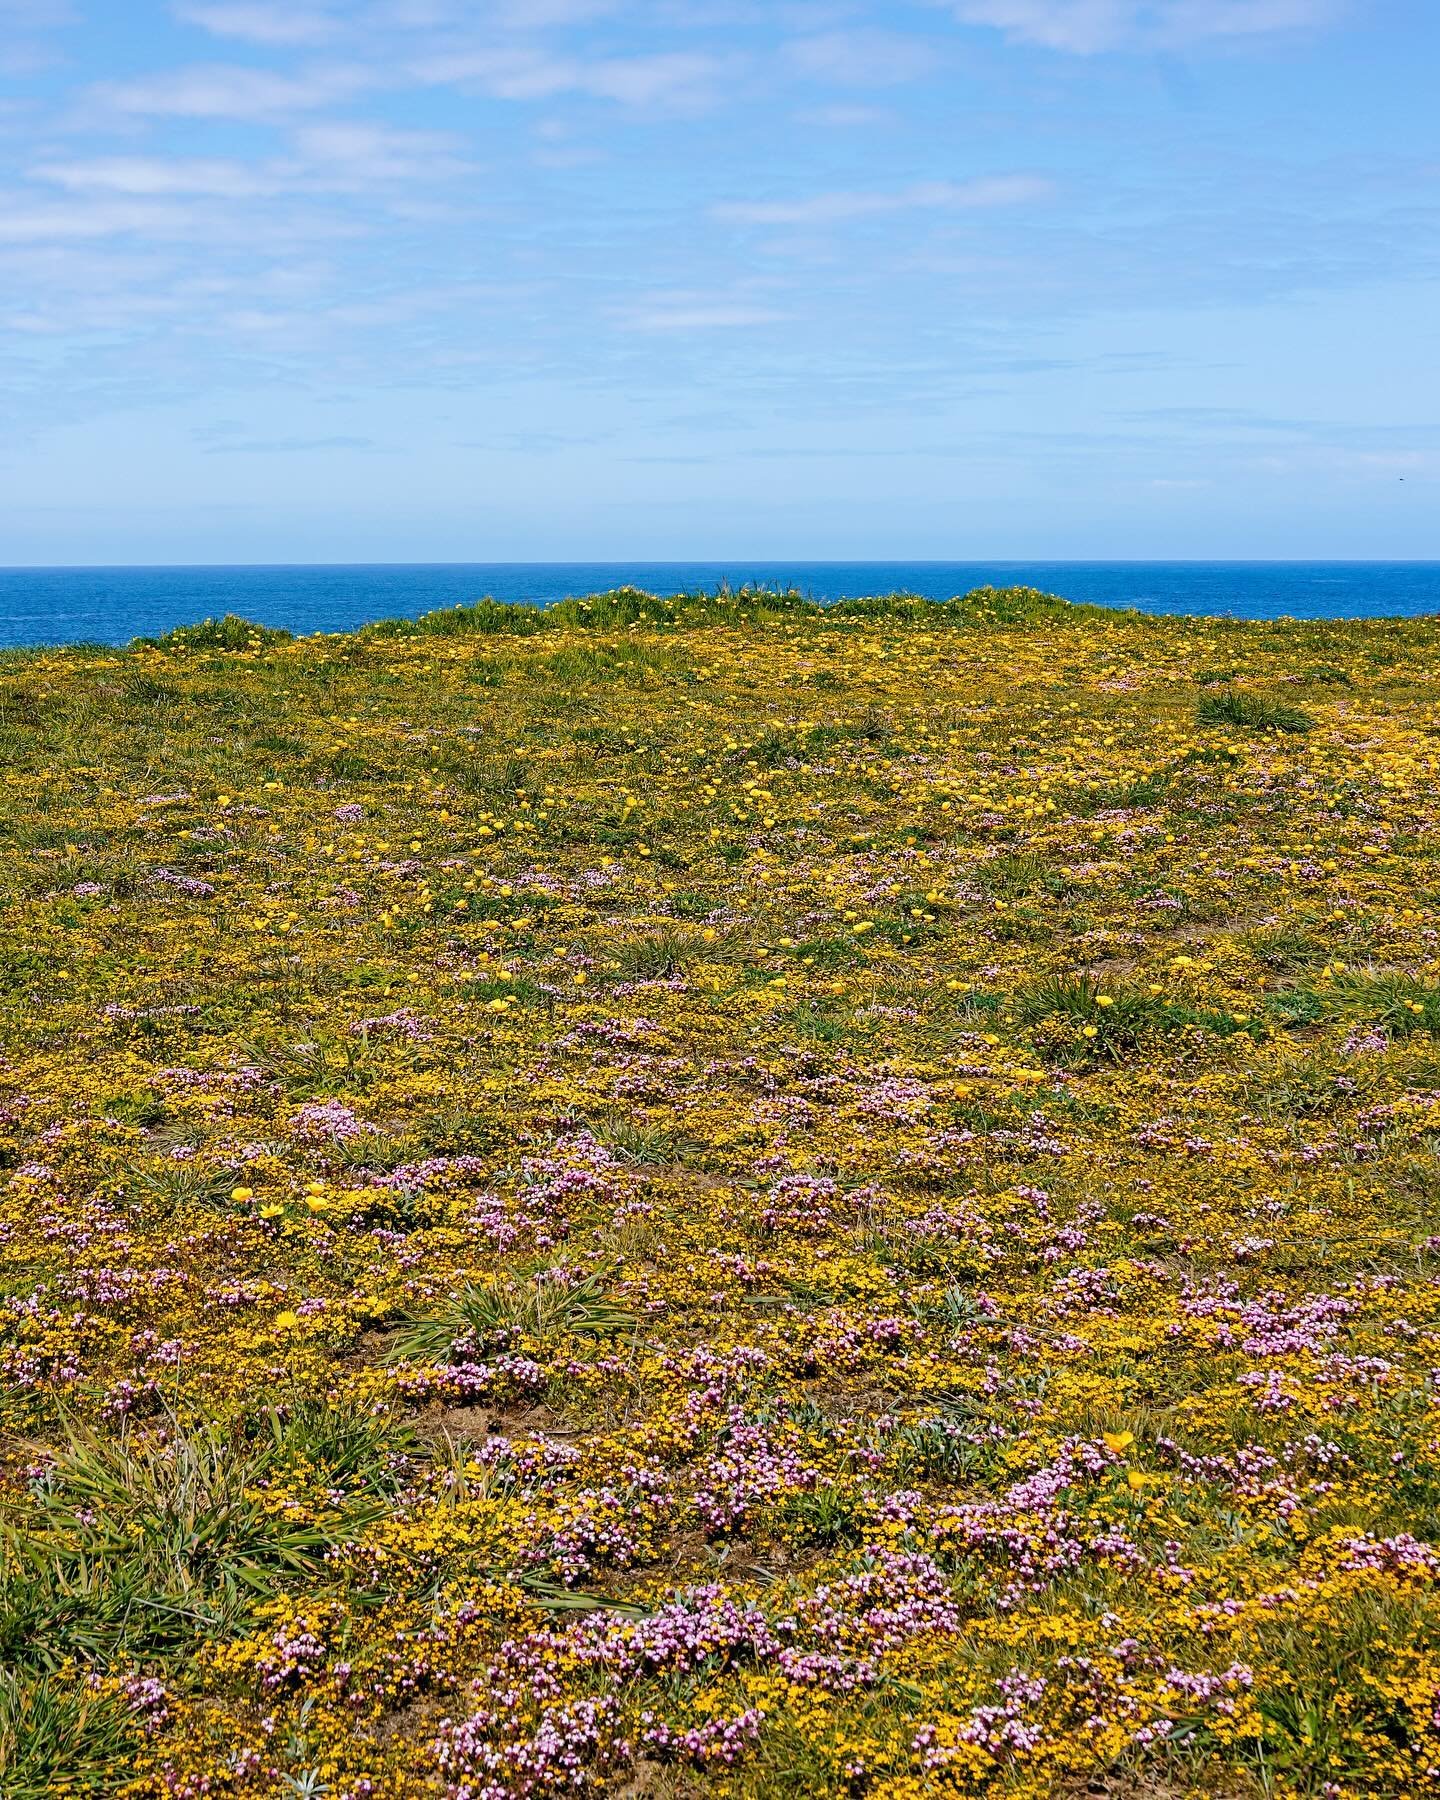 Reminder that this is what the Mendocino Coast looks like this time of year 🥰 Photos from a beautiful coast hike we did May 2023.
.
Planning a trip to Mendo? Comment WILDFLOWER for my Mendocino Google Map List. Quickly save all my hiking trail, rest